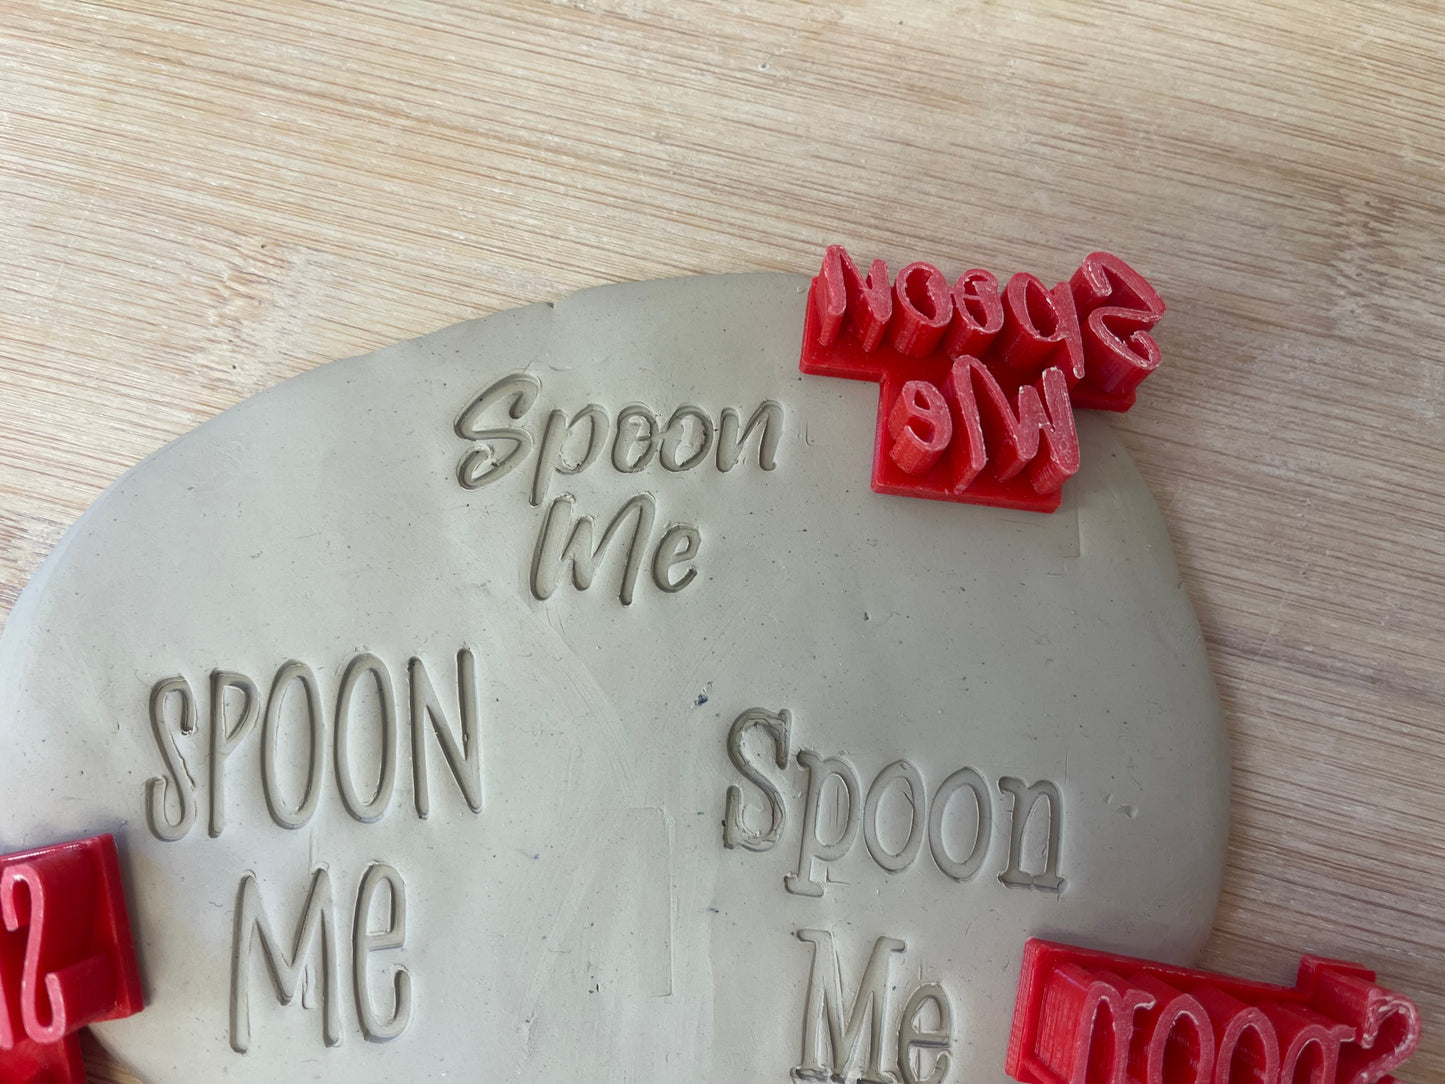 "Spoon Me" word stamp - for Spoon rest, plastic 3D printed, multiple sizes